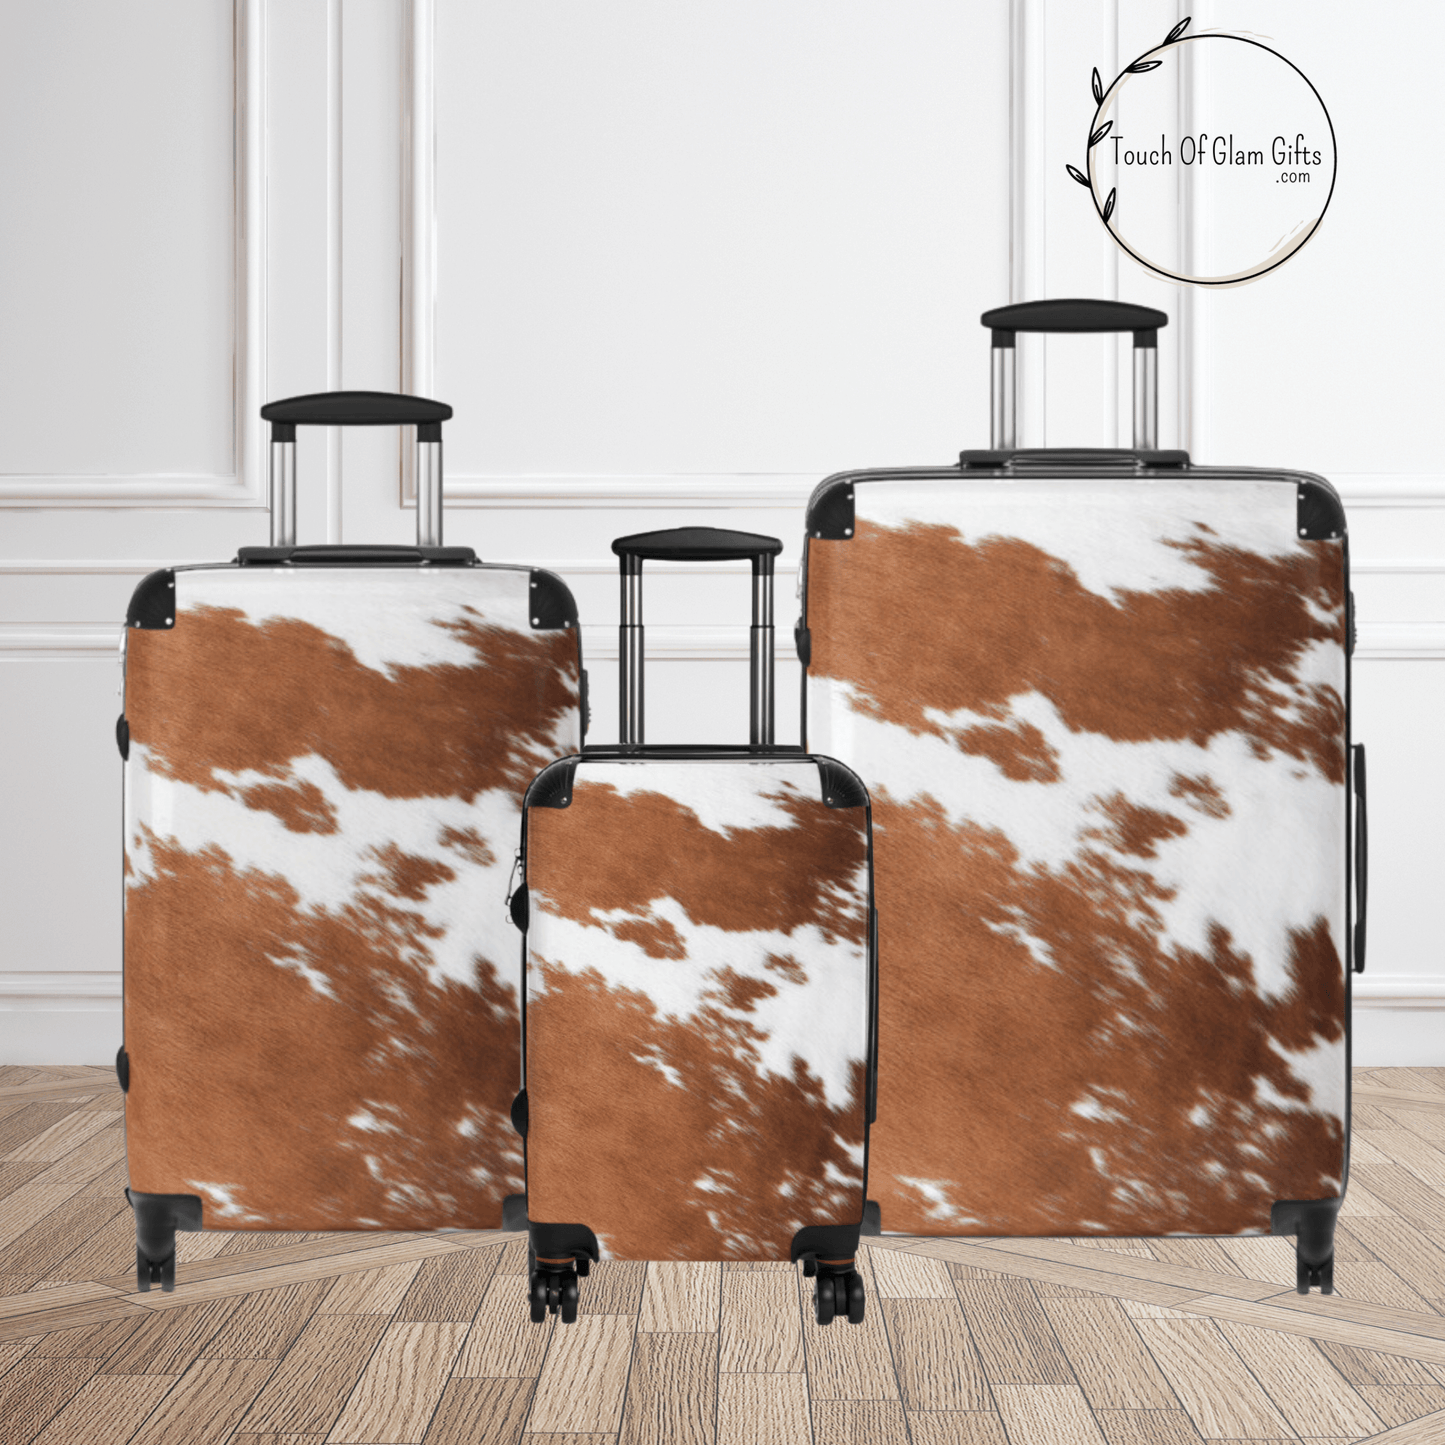 Personalized Cowhide Luggage Set #7, Cow Print Hard Shell Suitcases, Western Style Luggage